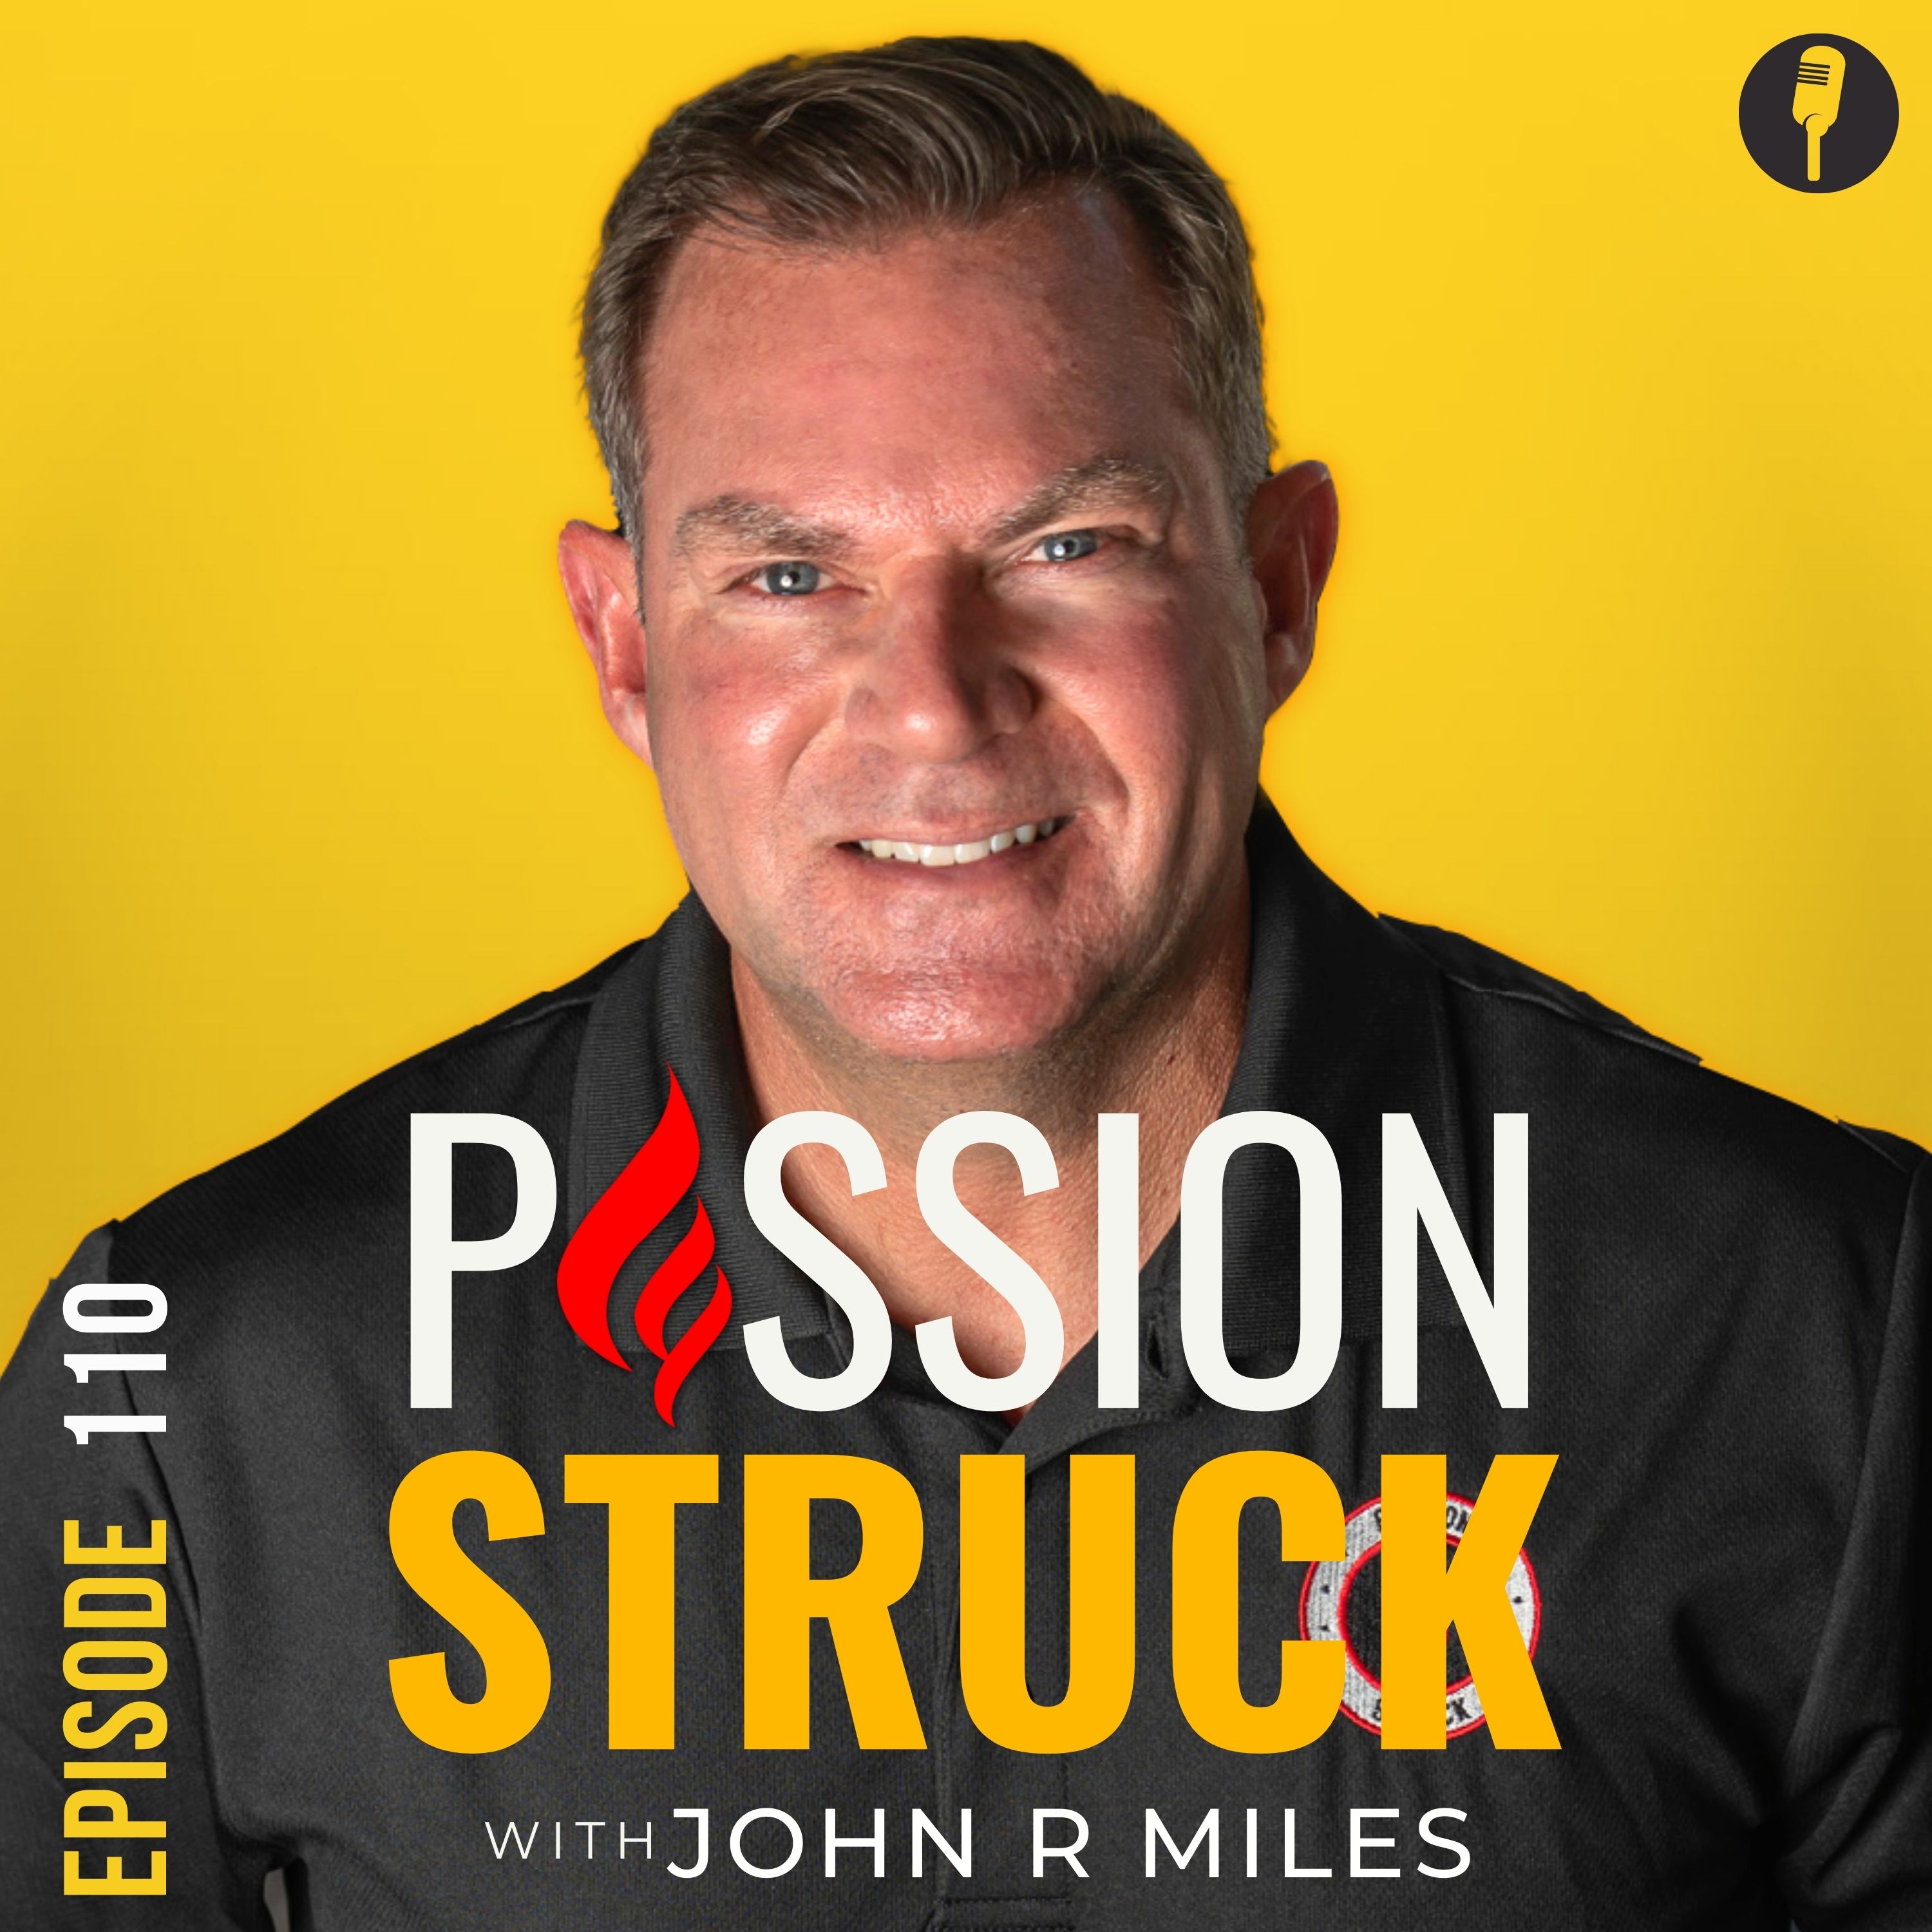 Passion Struck with John R. Miles album cover for episode 110 on best self